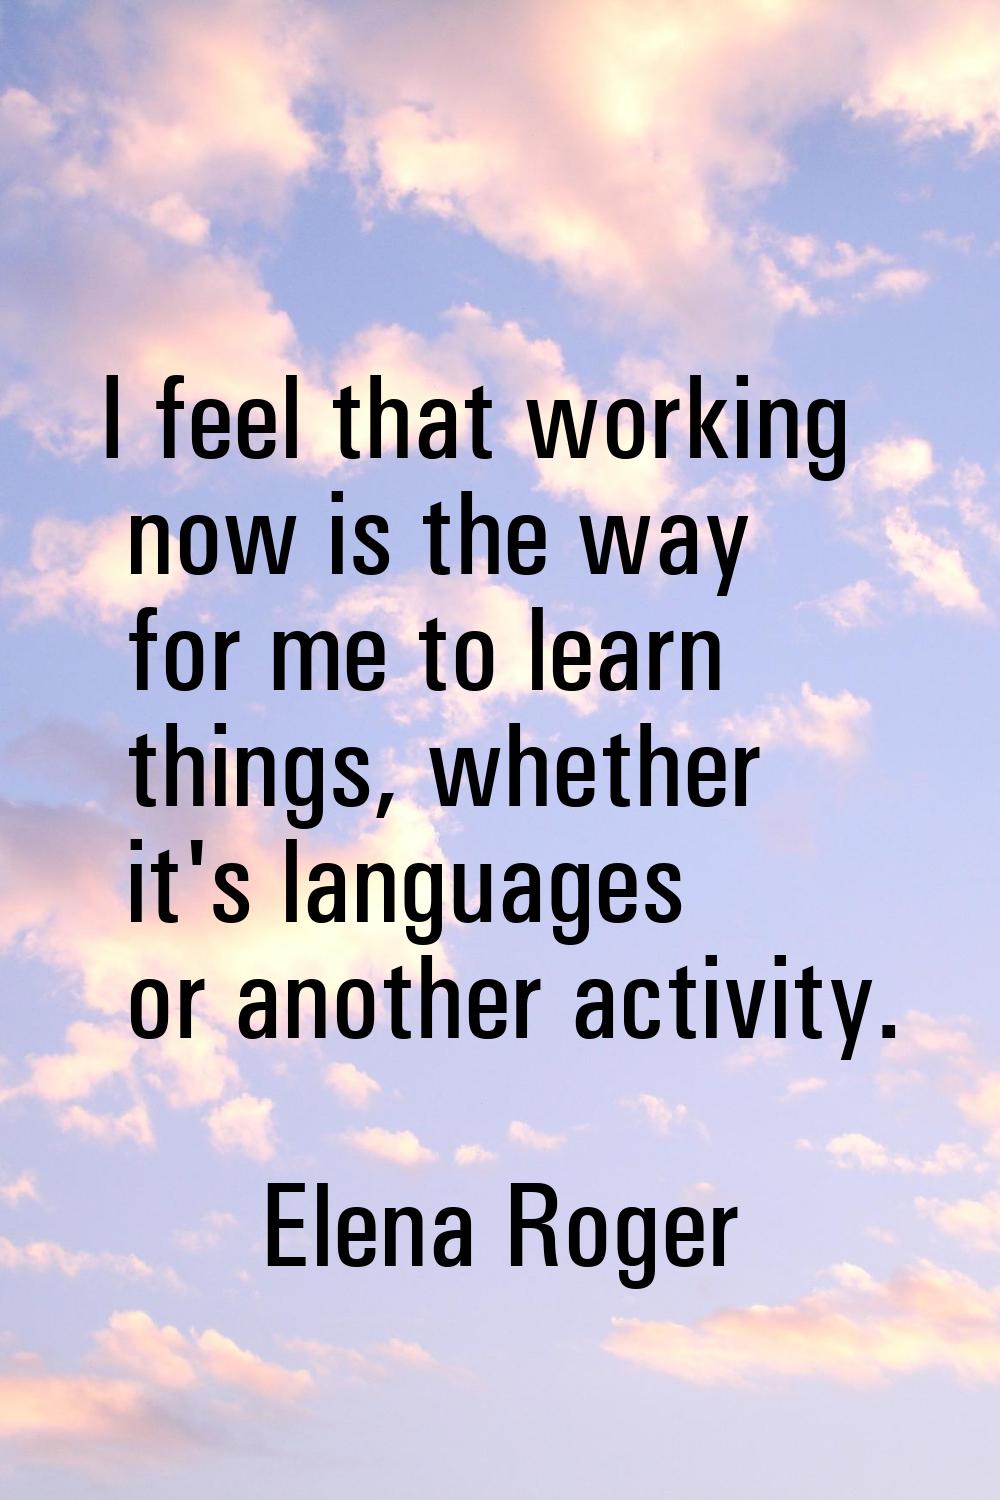 I feel that working now is the way for me to learn things, whether it's languages or another activi